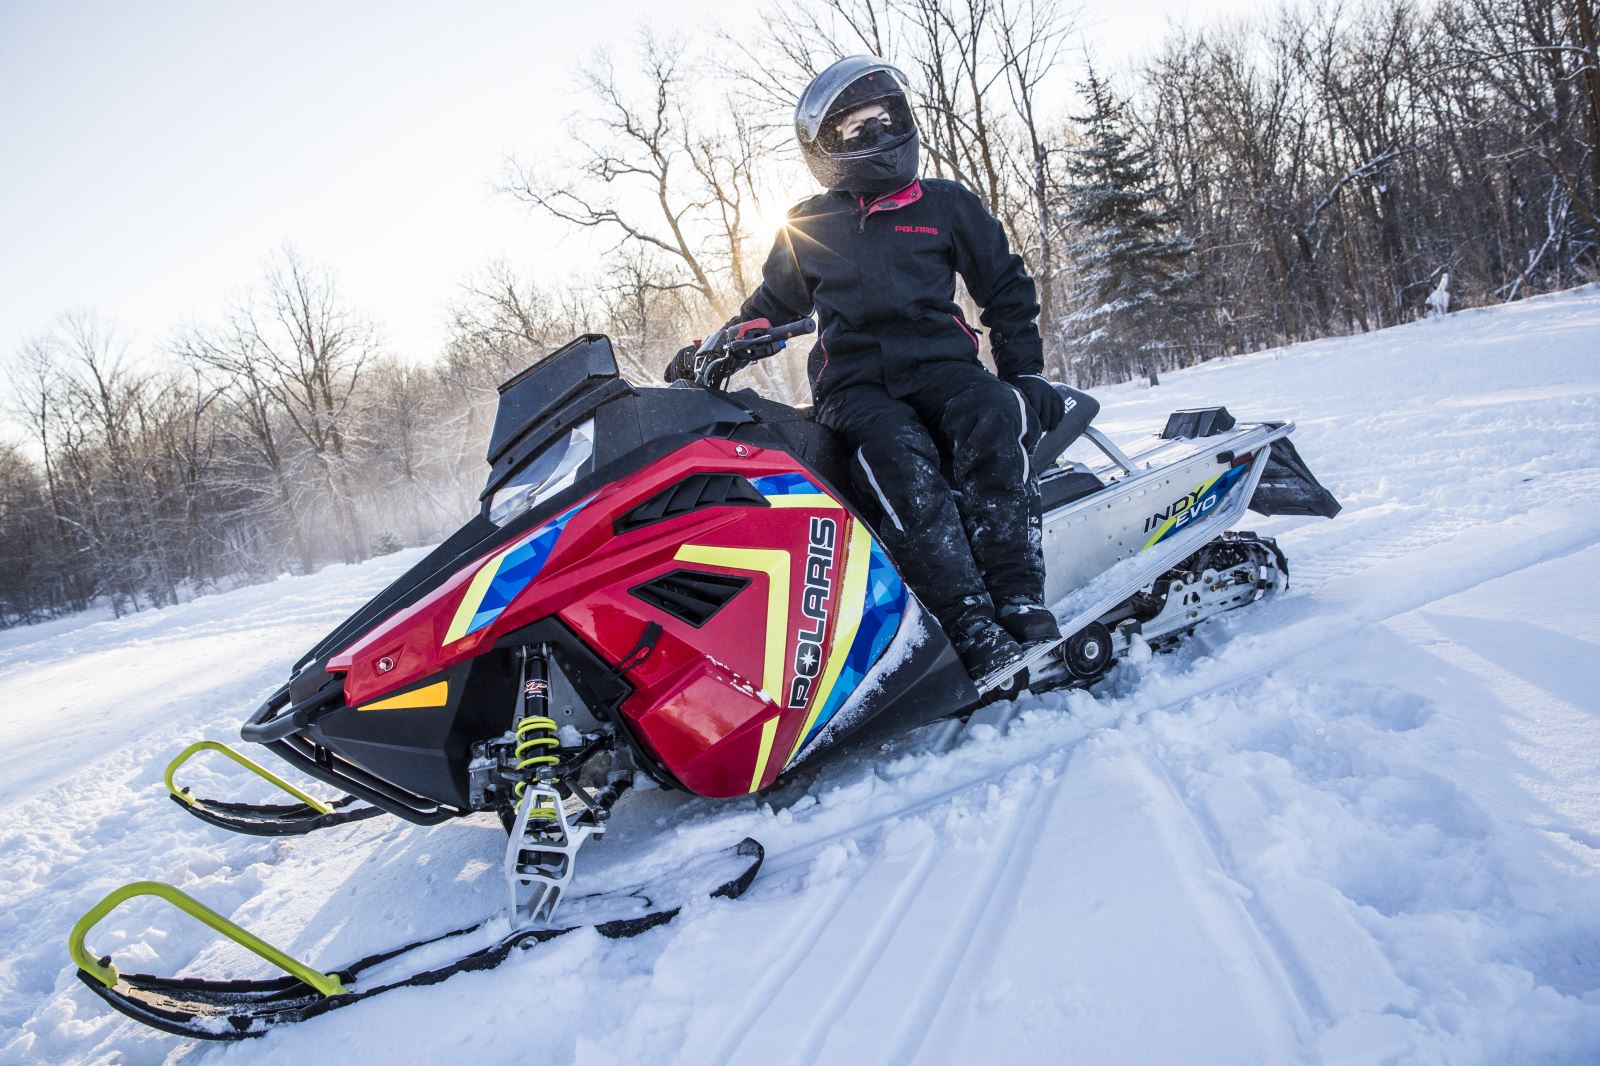 polaris-introduces-all-new-snowmobile-designed-specifically-for-new